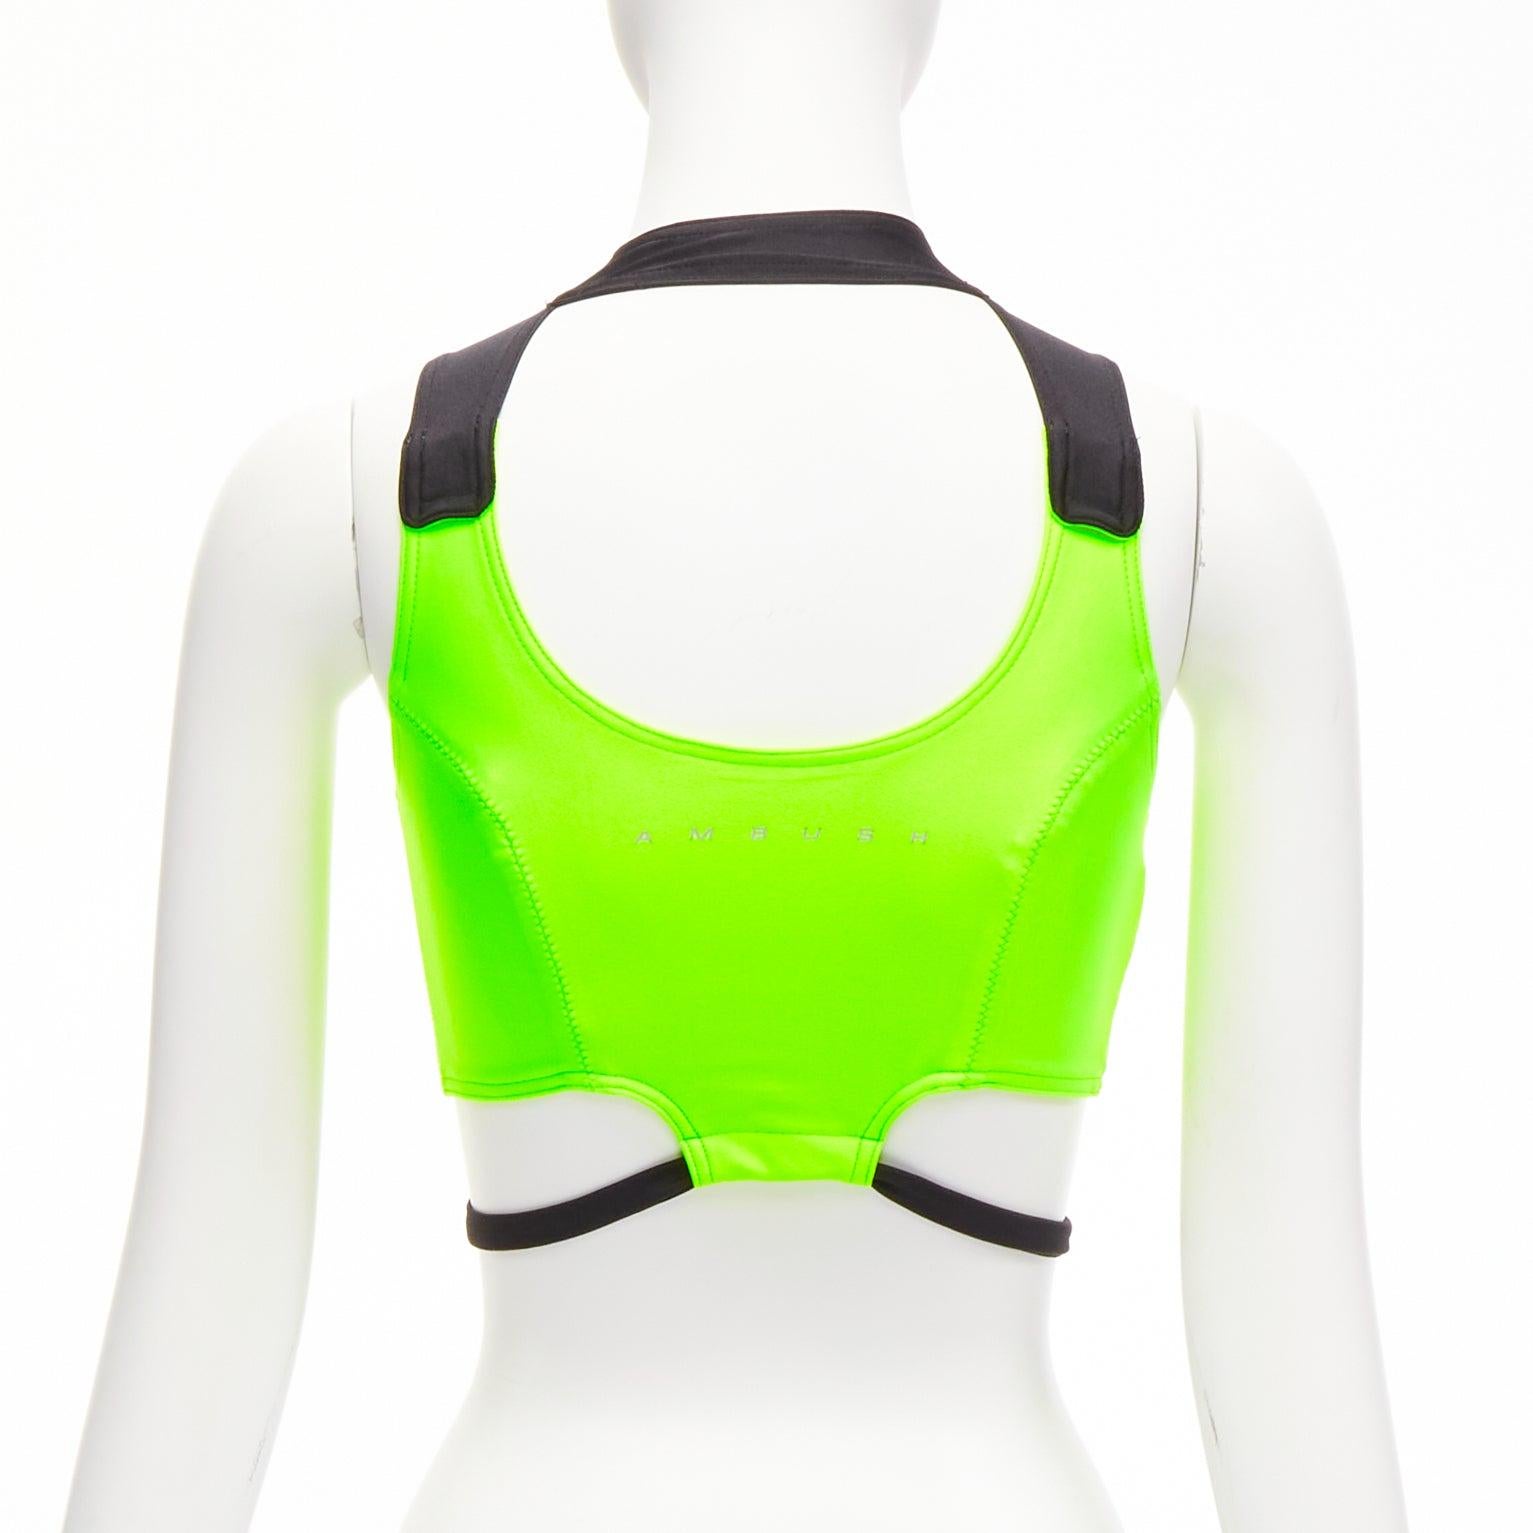 AMBUSH neon green black panelled logo back waist tie cropped sports top Size 1 S

Reference: BSHW/A00032
Brand: Ambush
Color: Green, Black
Pattern: Solid
Closure: Snap Buttons
Extra Details: Snap button back neck closure.

CONDITION:
Condition: Very